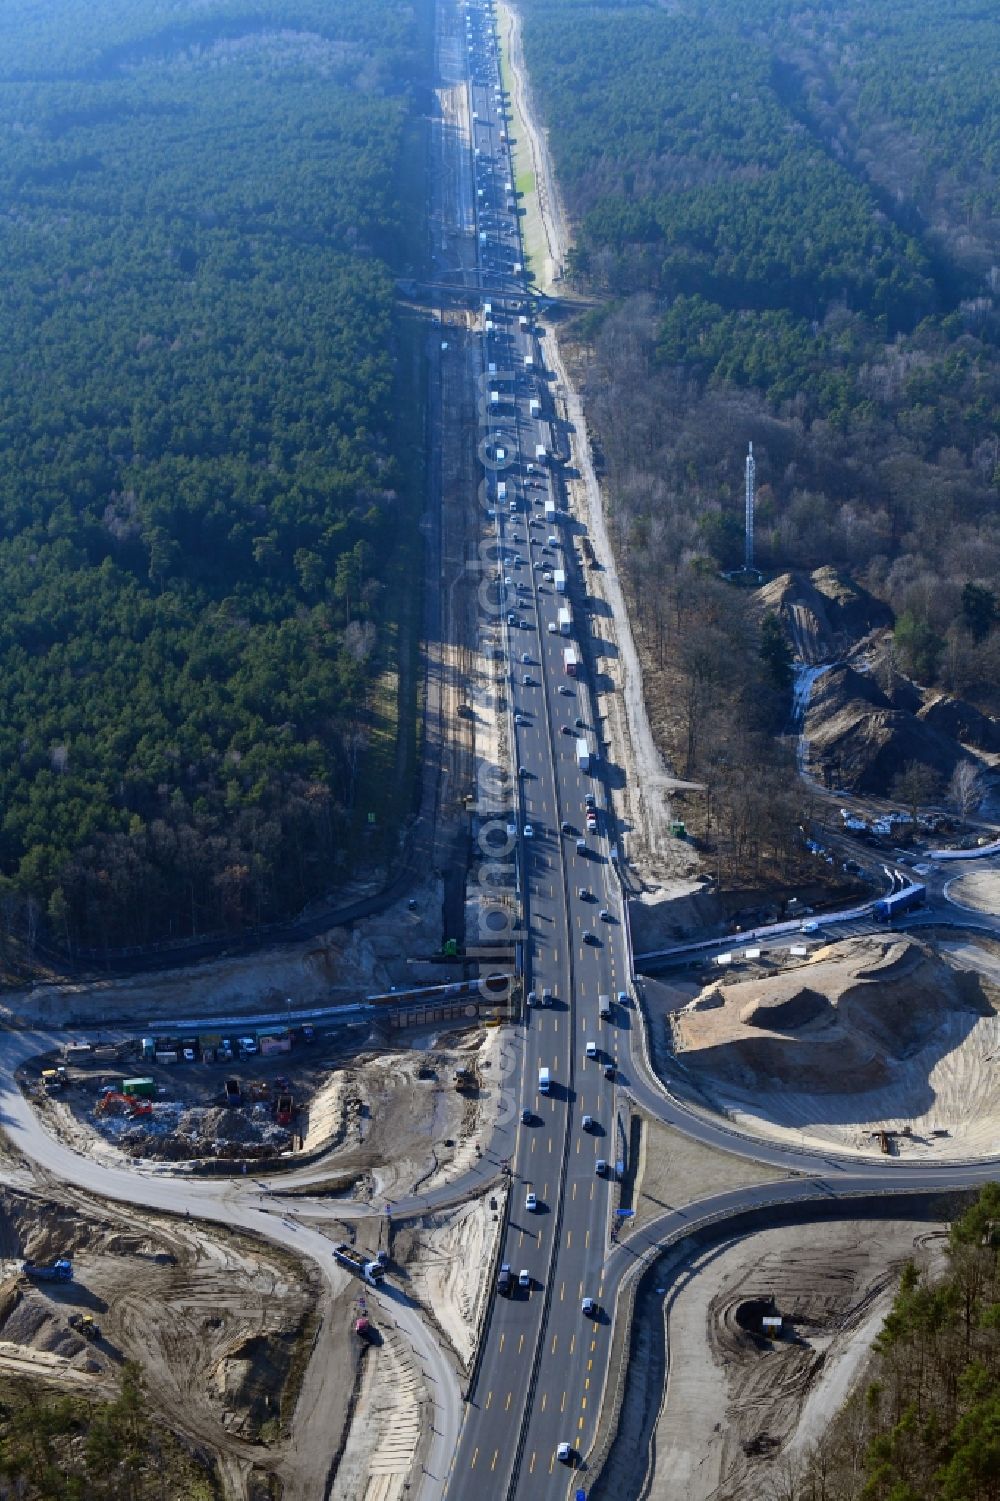 Ferch from the bird's eye view: Construction site for the expansion of traffic flow on the motorway BAB A 10 in Ferch in the state Brandenburg, Germany